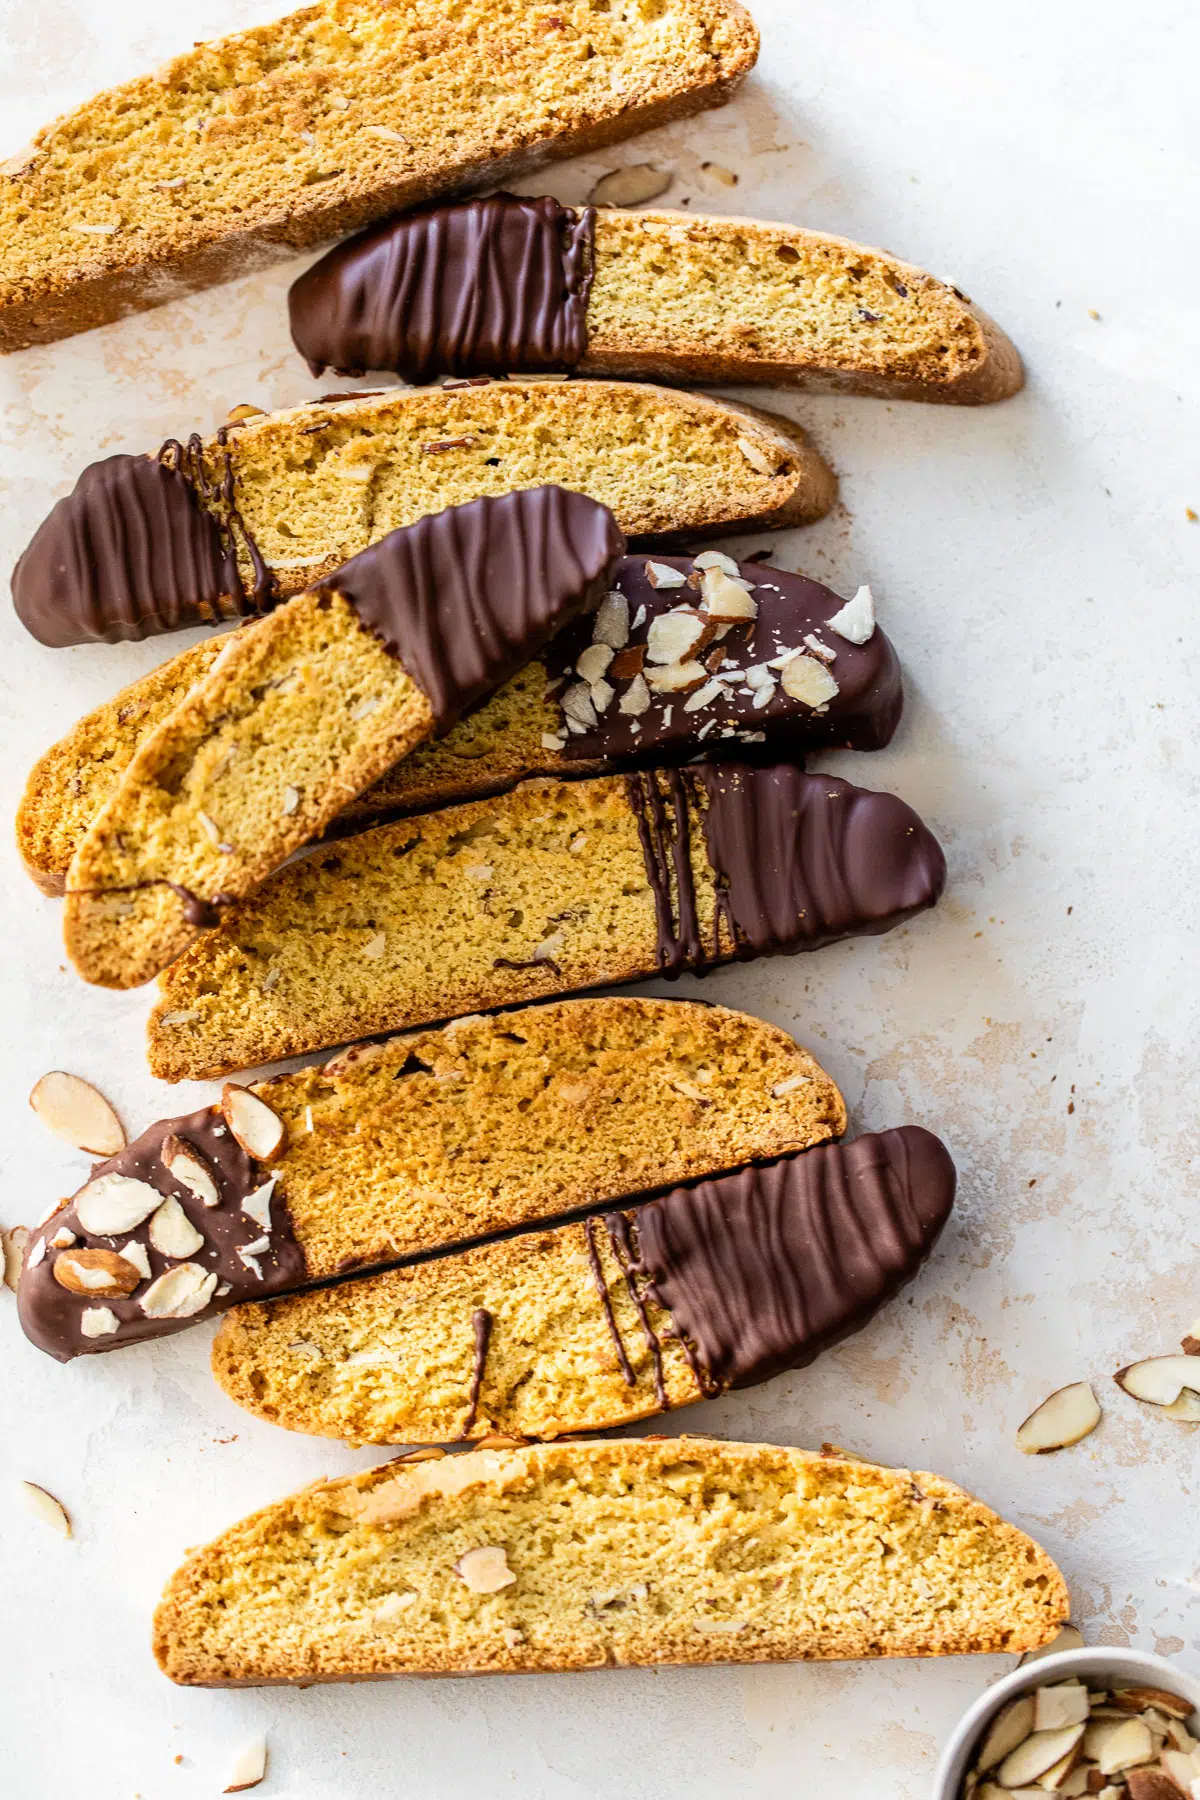 biscotti dipped in chocolate and coated in sliced almonds